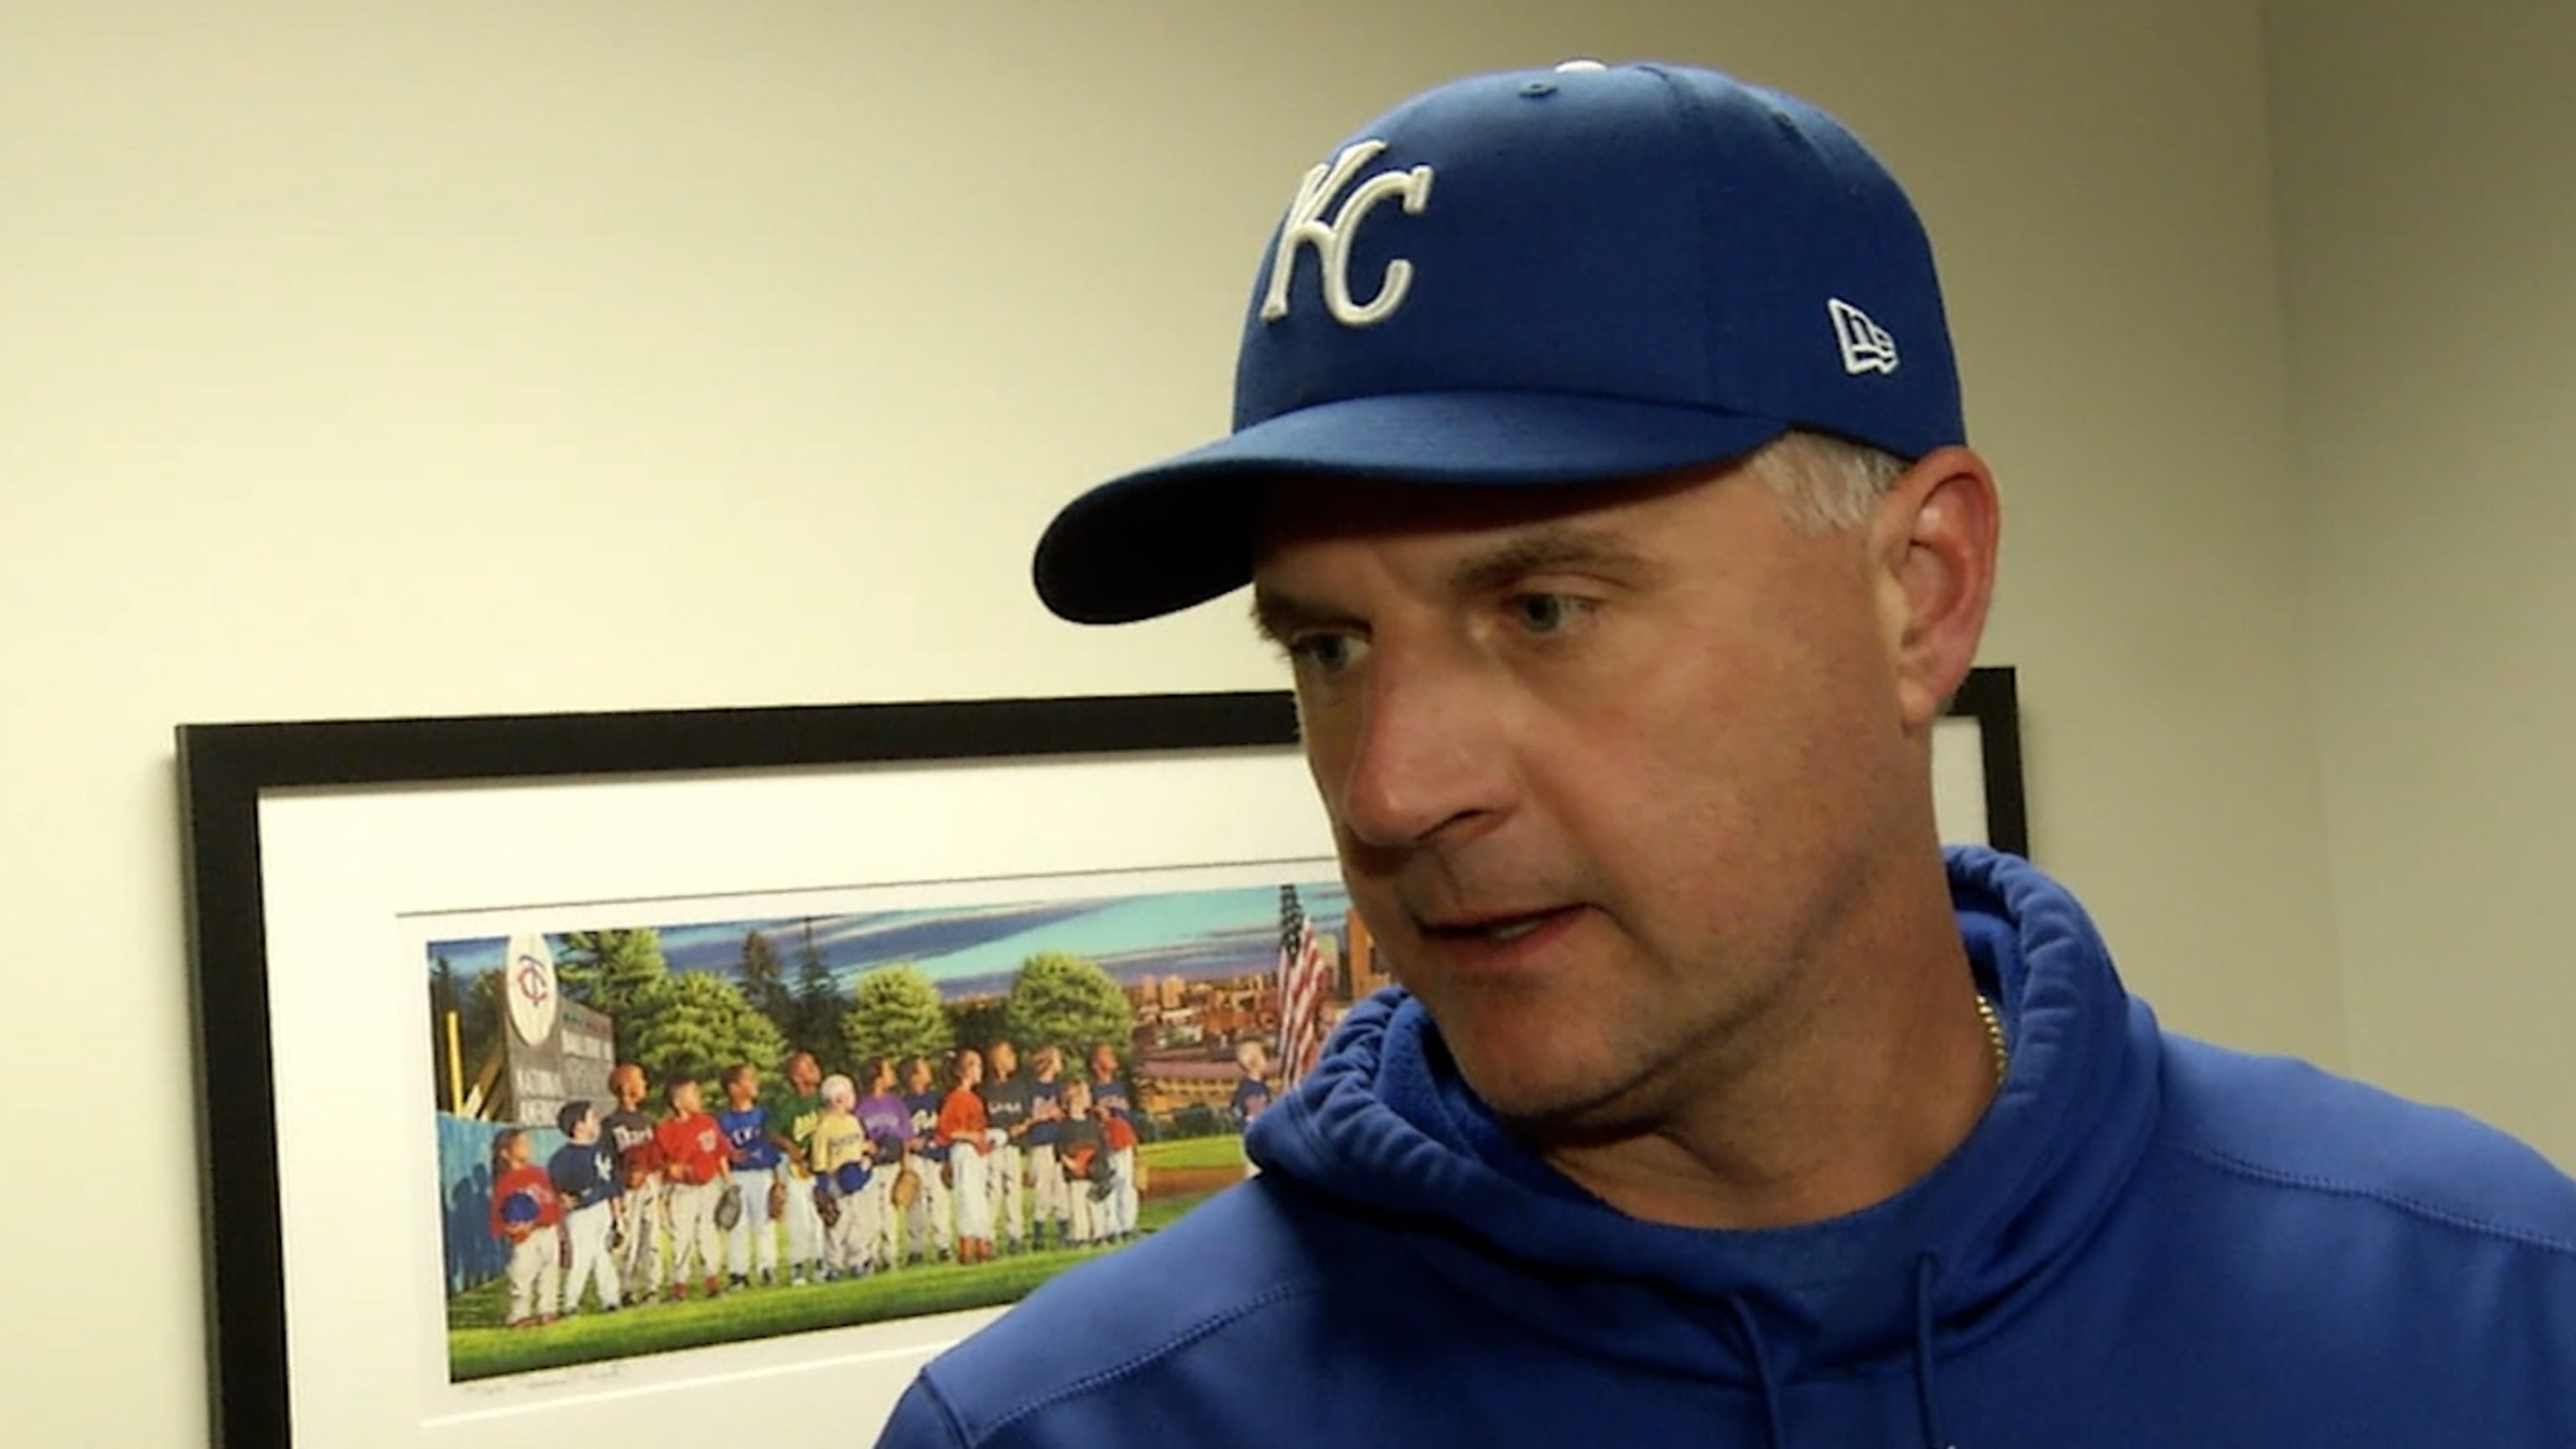 Royals manager Matt Quatraro ejected, two pitches before walk-off